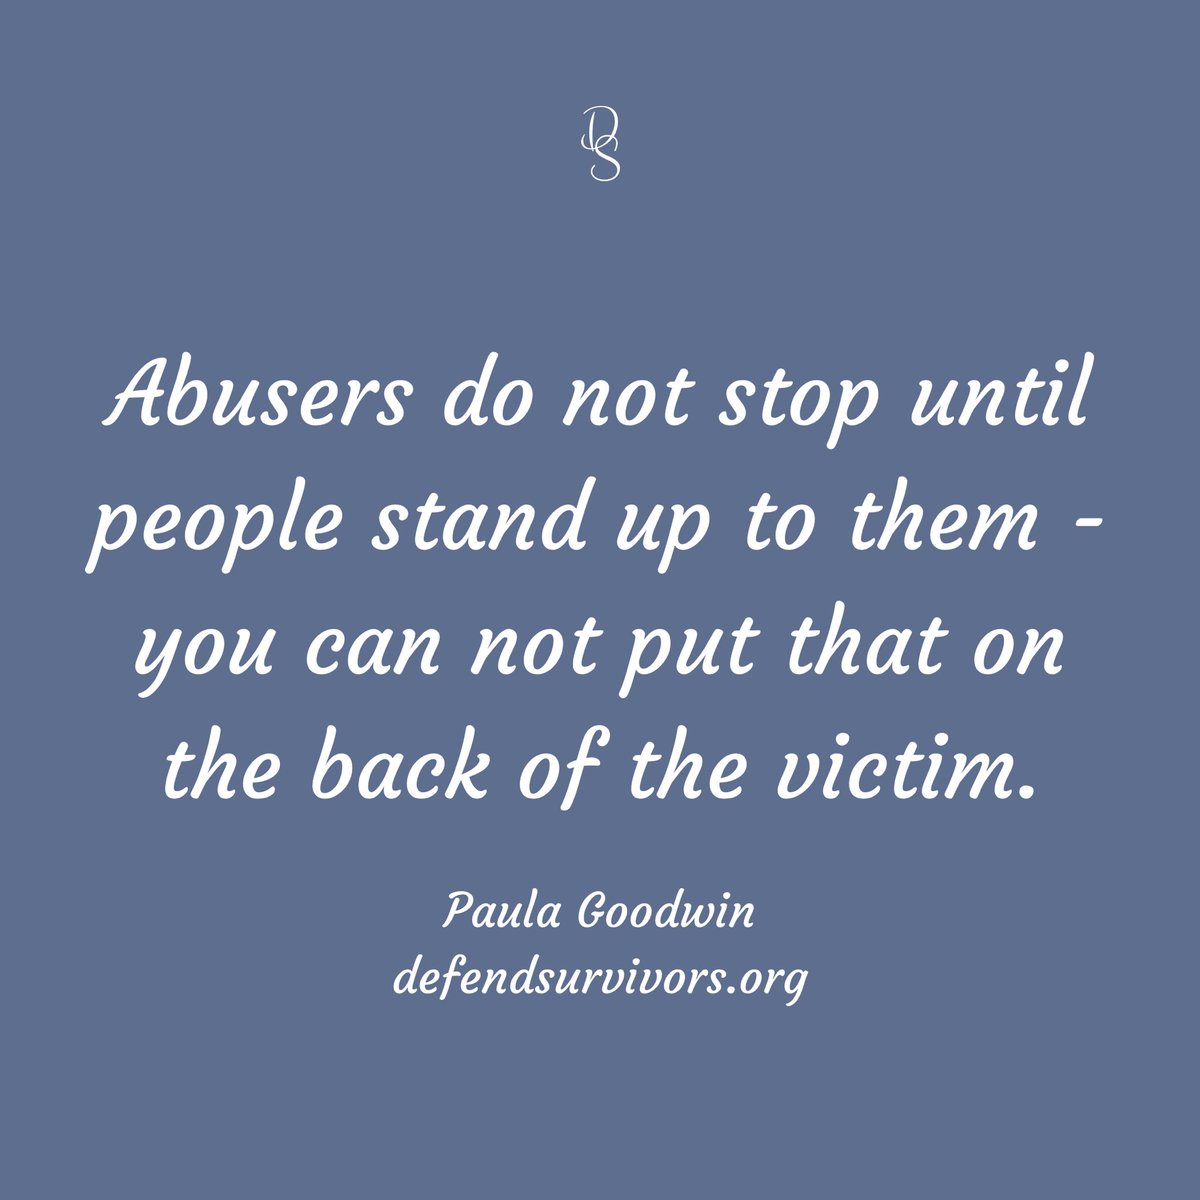 Abusers do not stop until people stand up to them - you can not put that on the back of the victim.